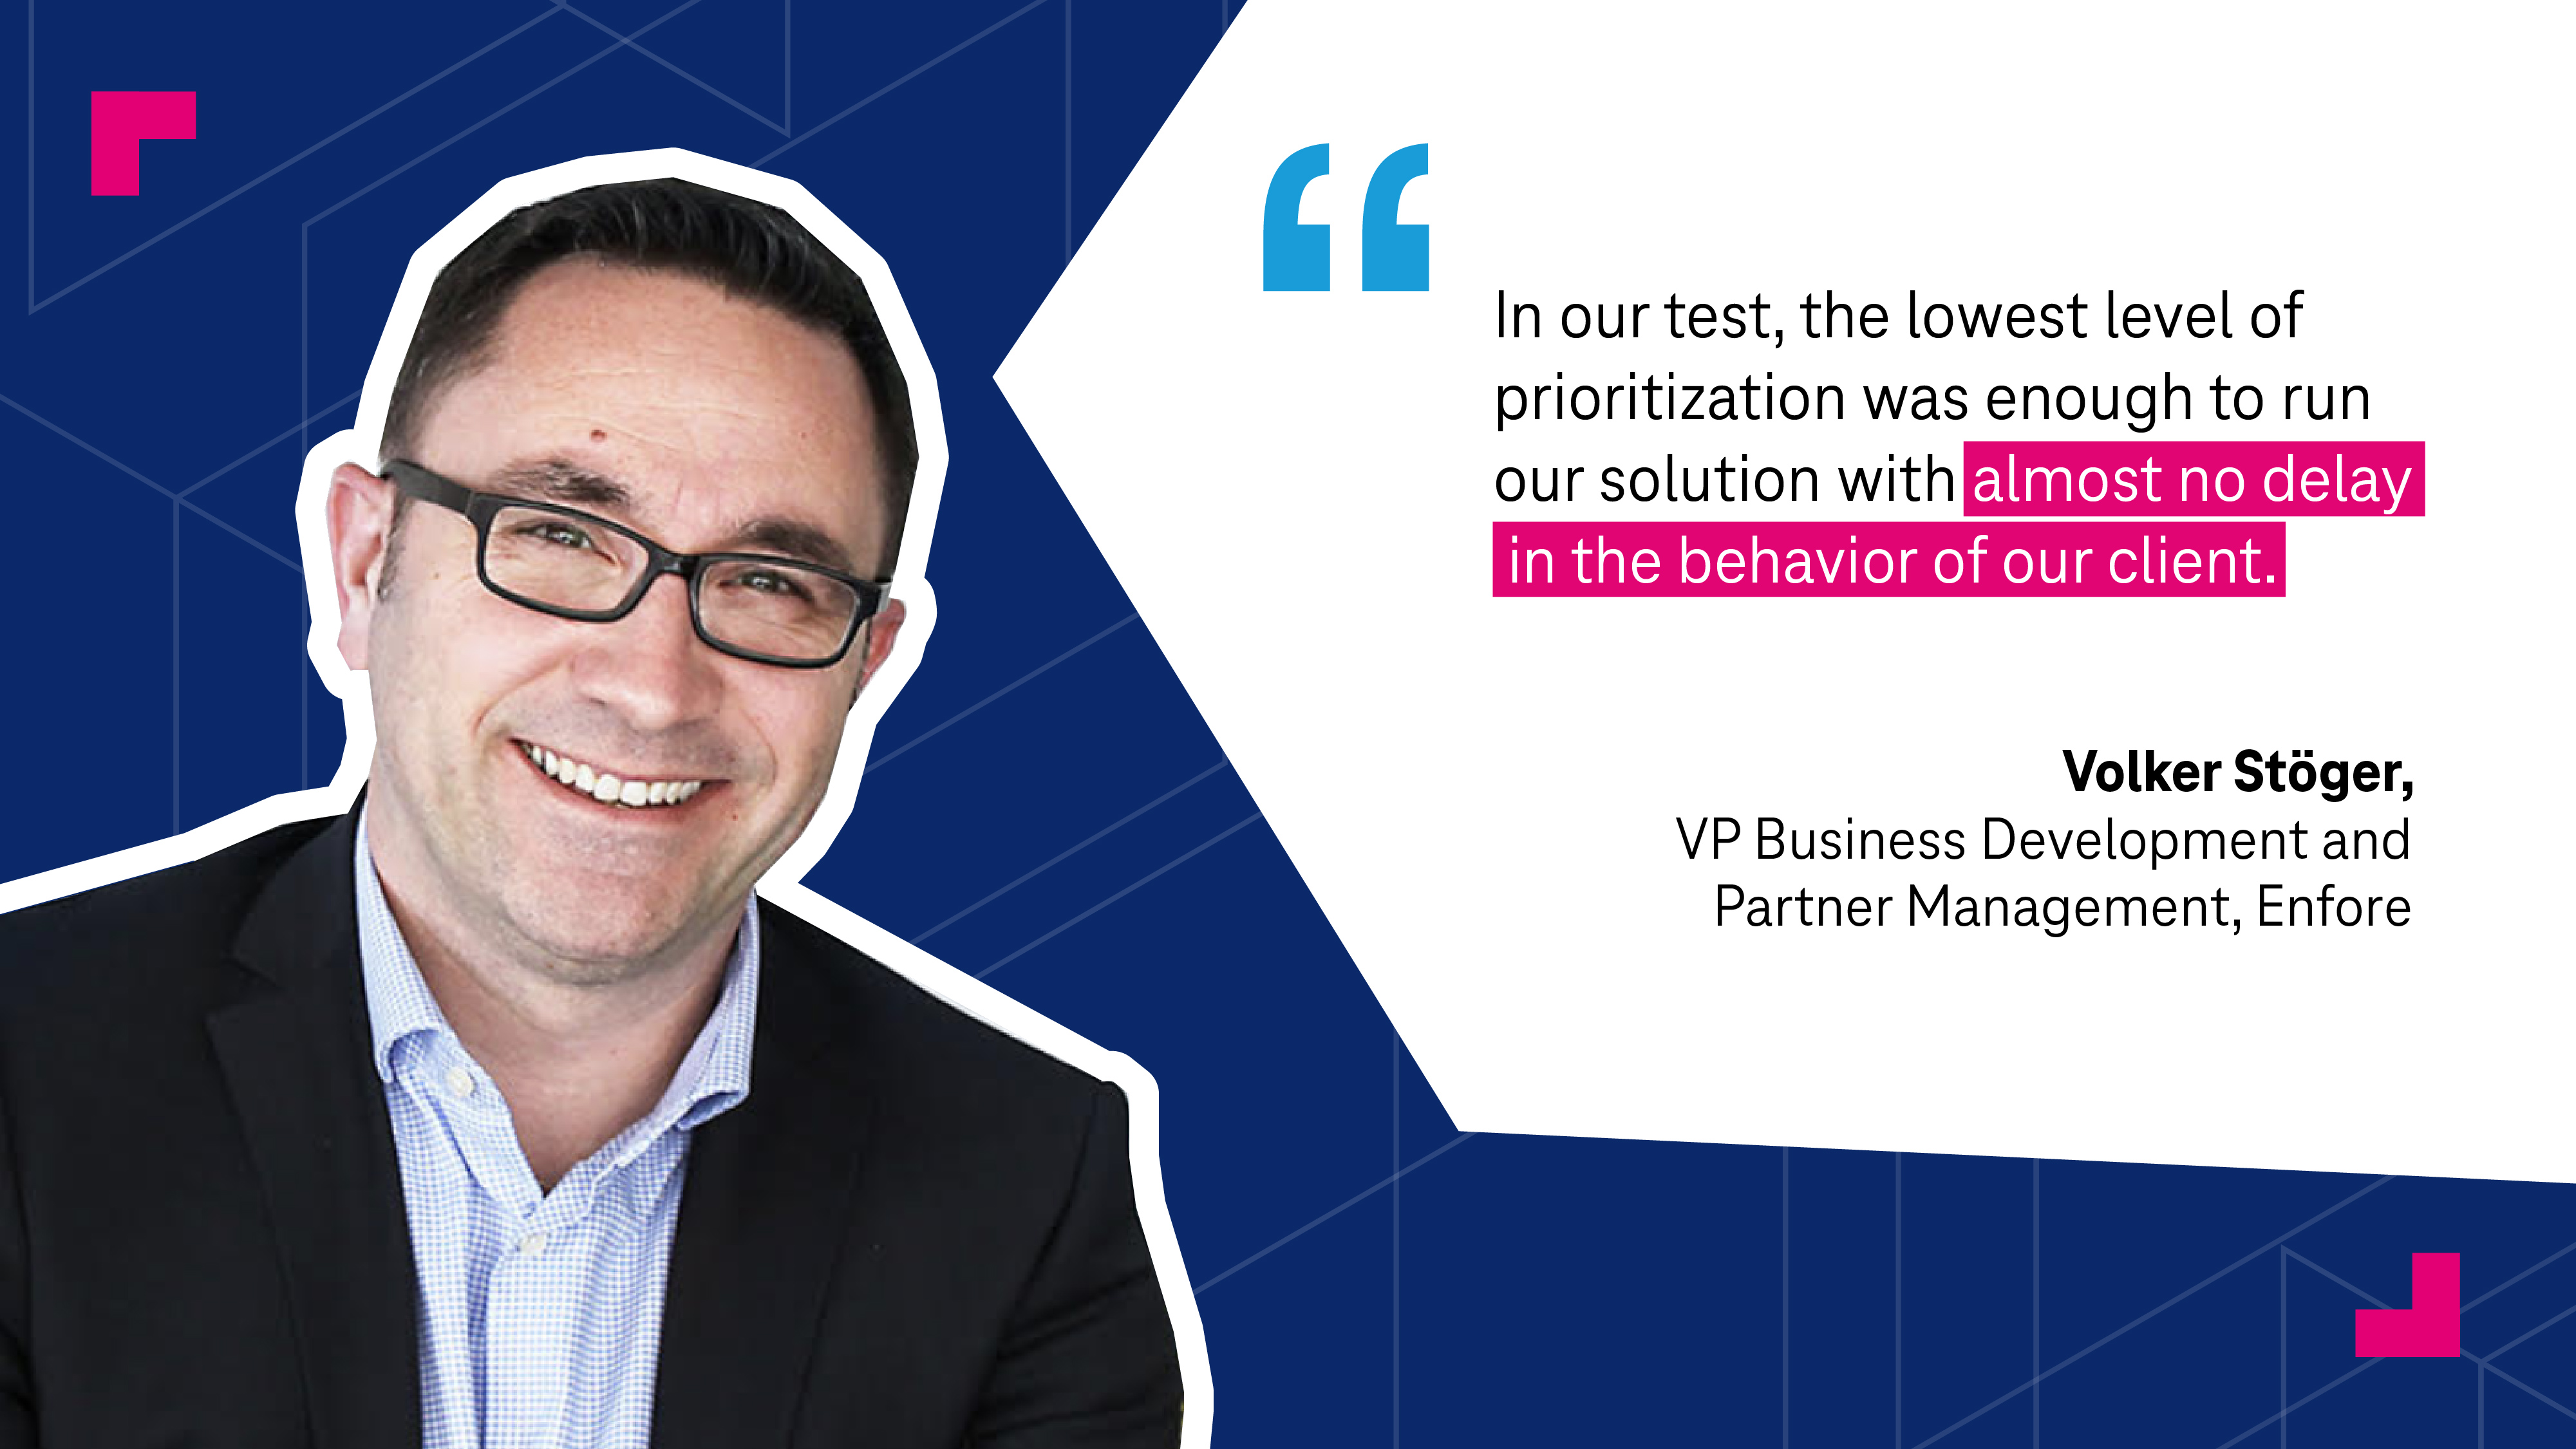 "In the our test, the lowest level of prioritization was enough to run our solution with almost no delay in the behavior of our client," Volker Stöger, VP Business Development and Partner Management, Enfore 